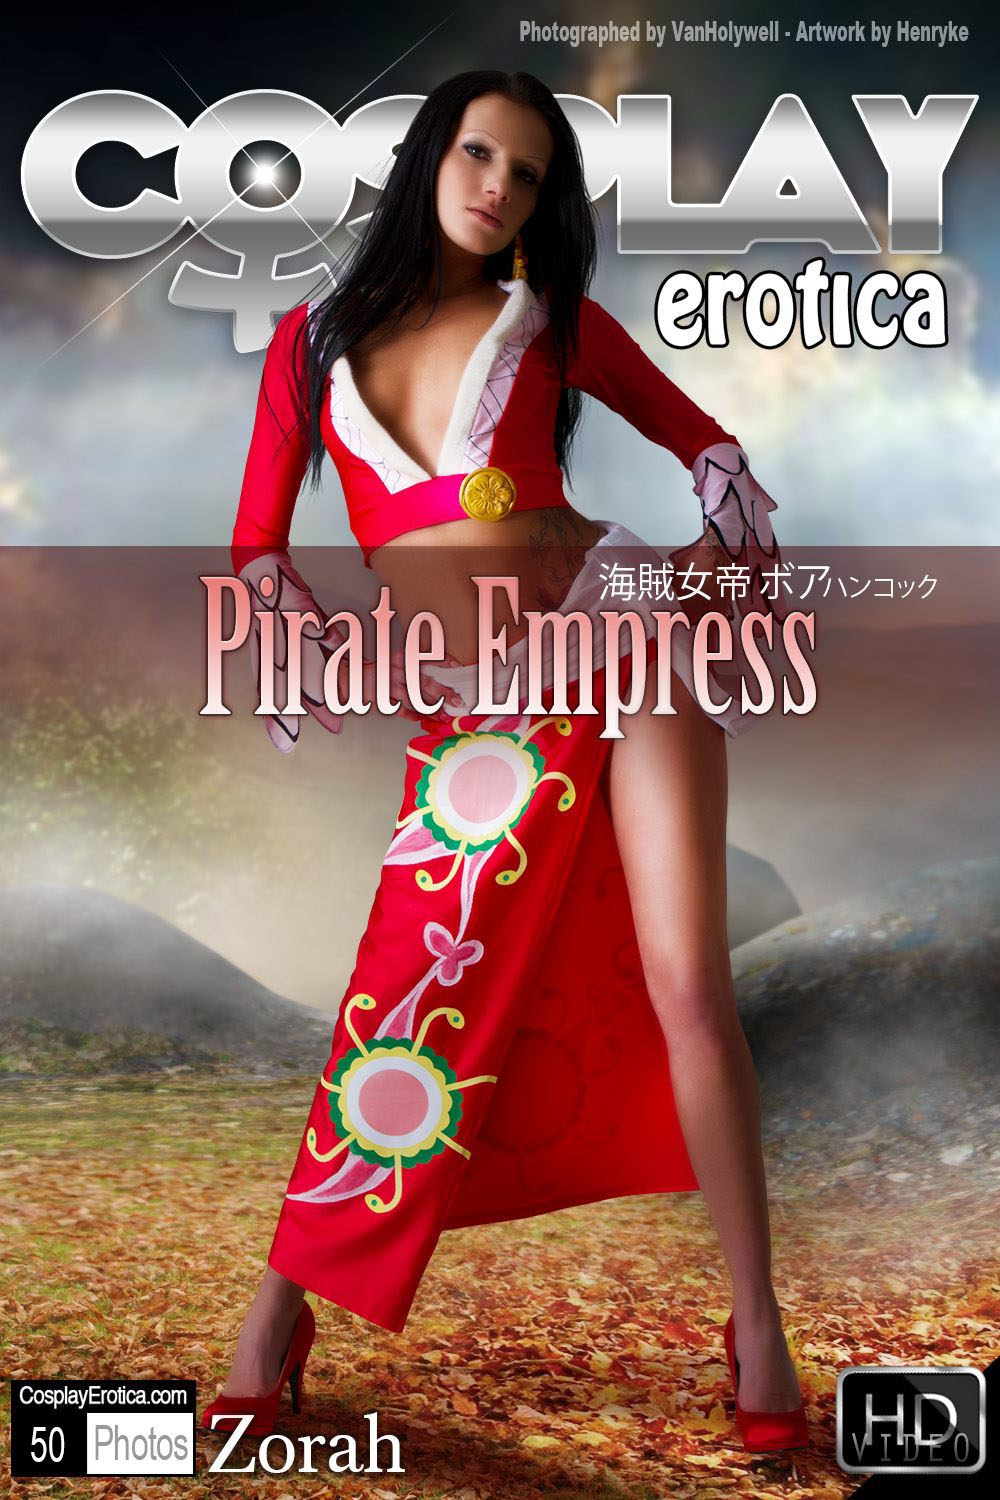 Zorah - Pirate Empress shows free gallery picture 01-0001